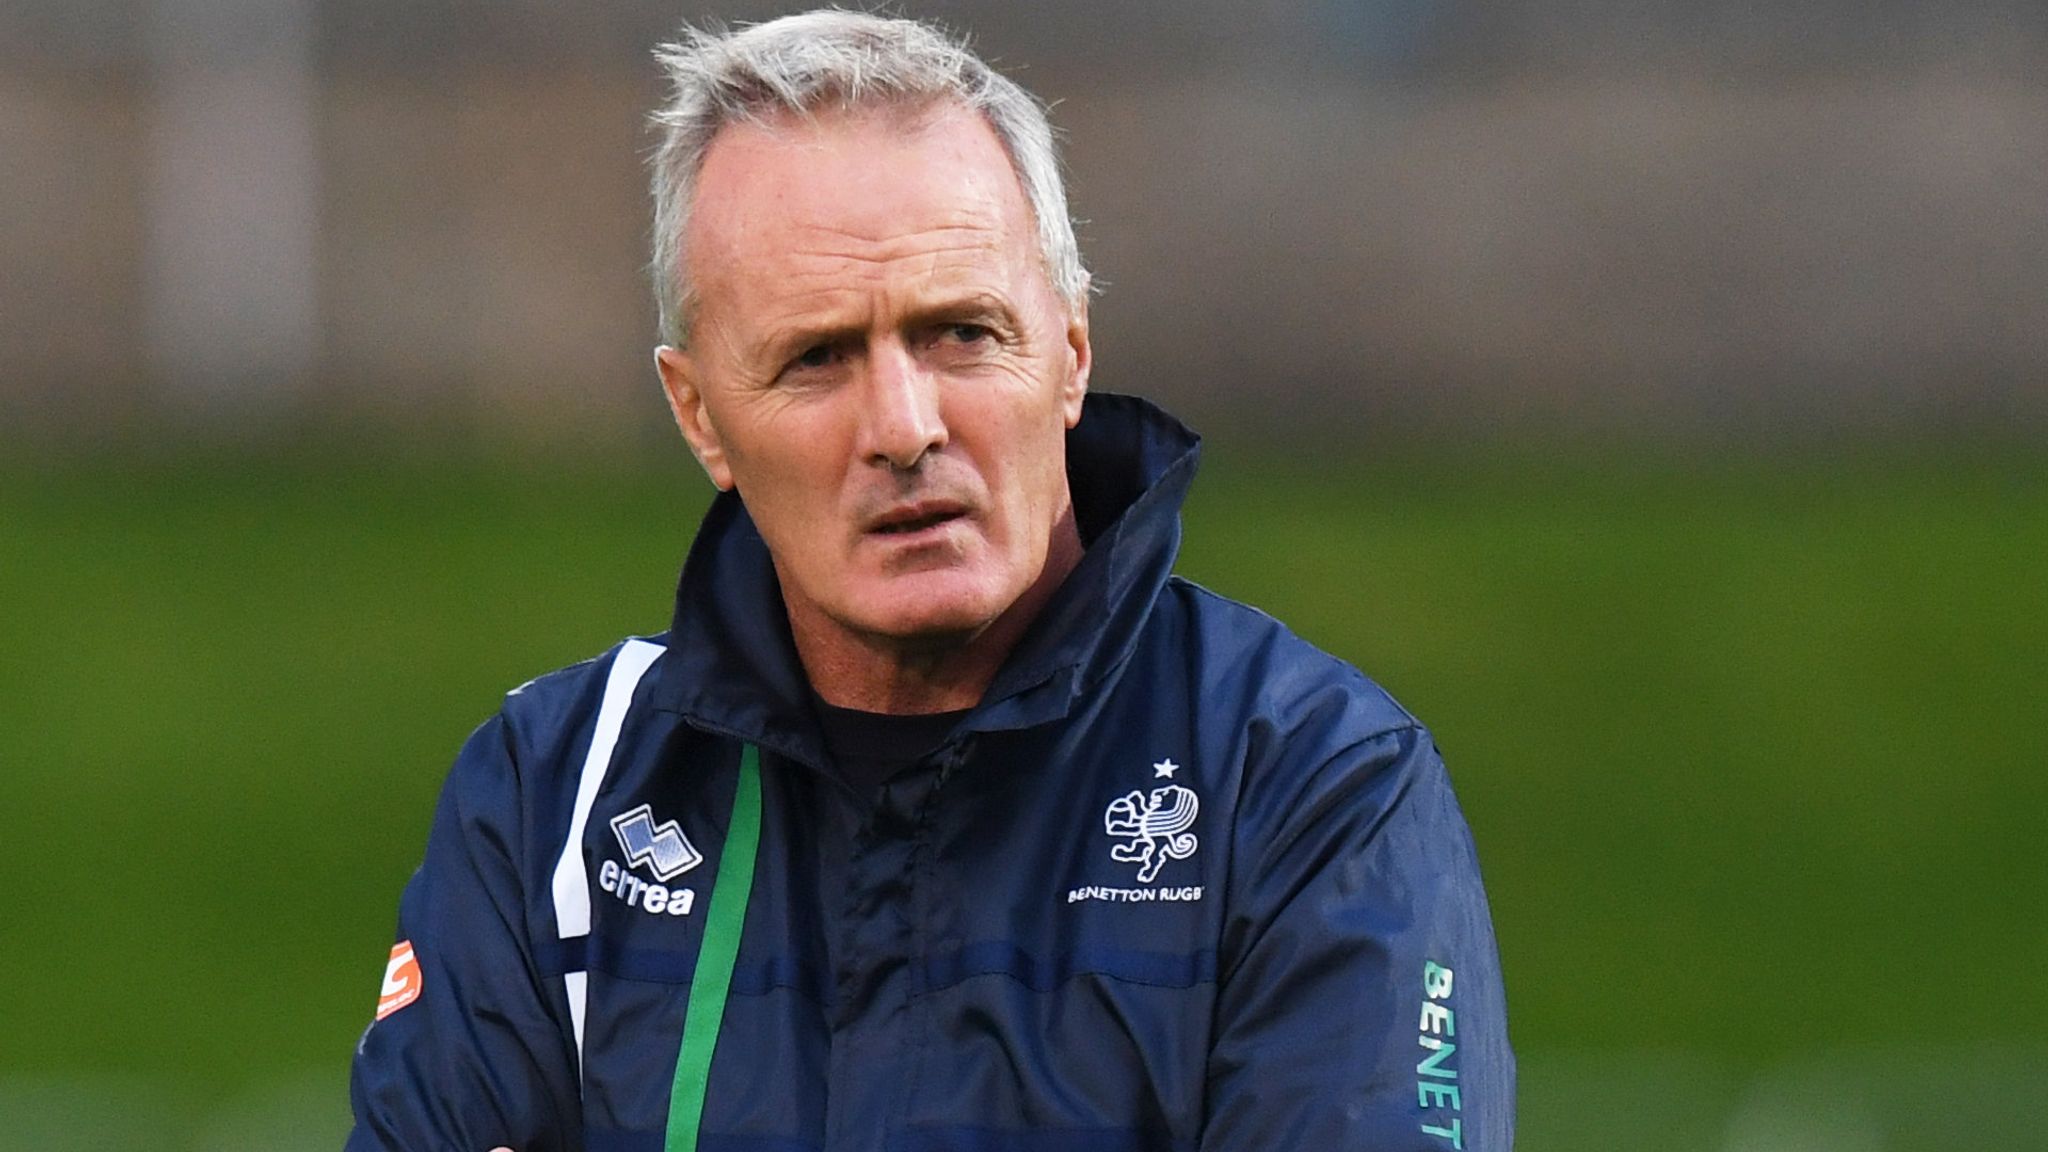 Kieran Crowley: Former All Black replaces Franco Smith as Italy coach |  Rugby Union News | Sky Sports